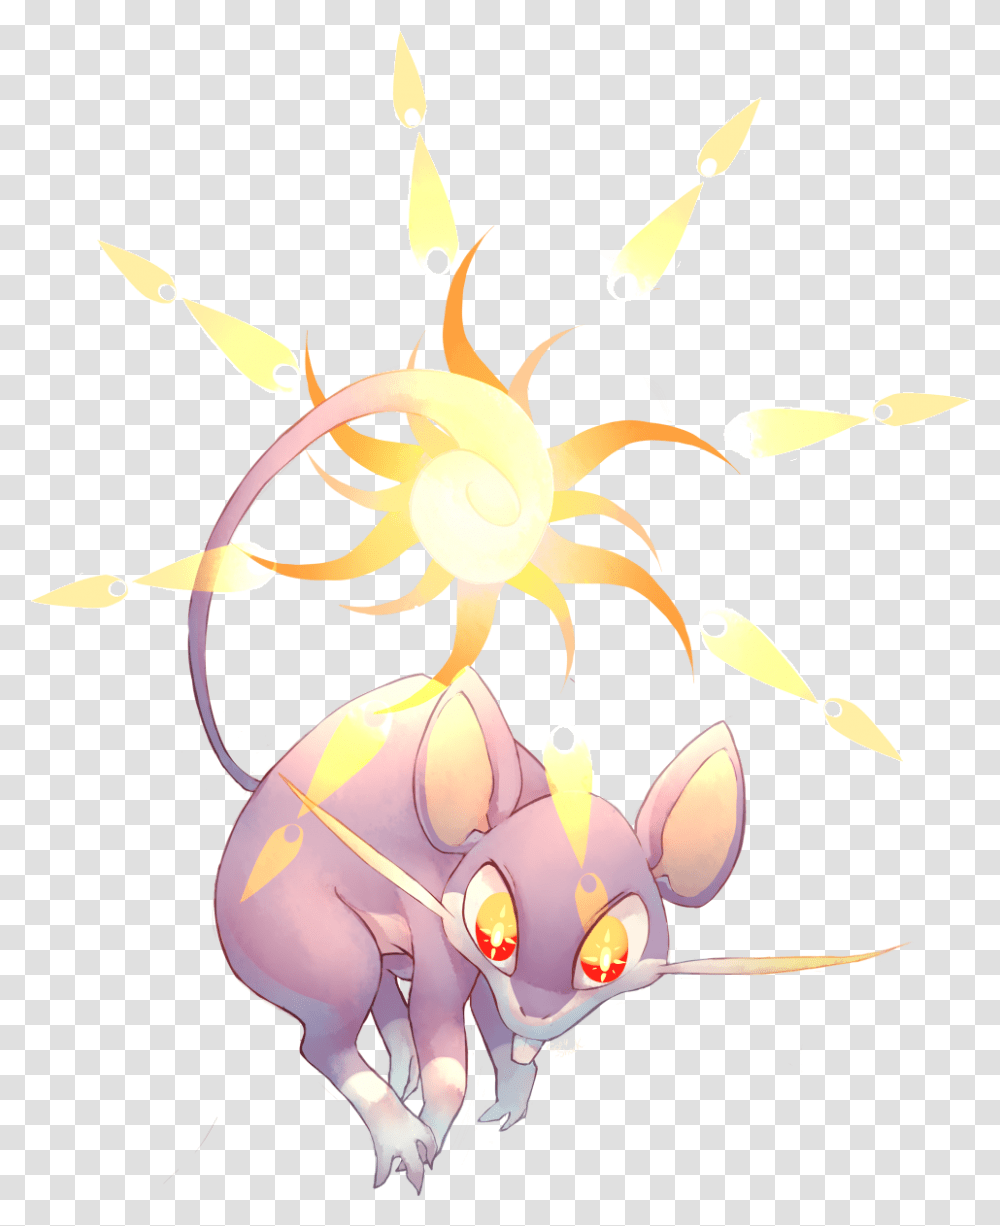 Rattata Used Sunny Day And Thunder Rat, Graphics, Art, Floral Design, Pattern Transparent Png